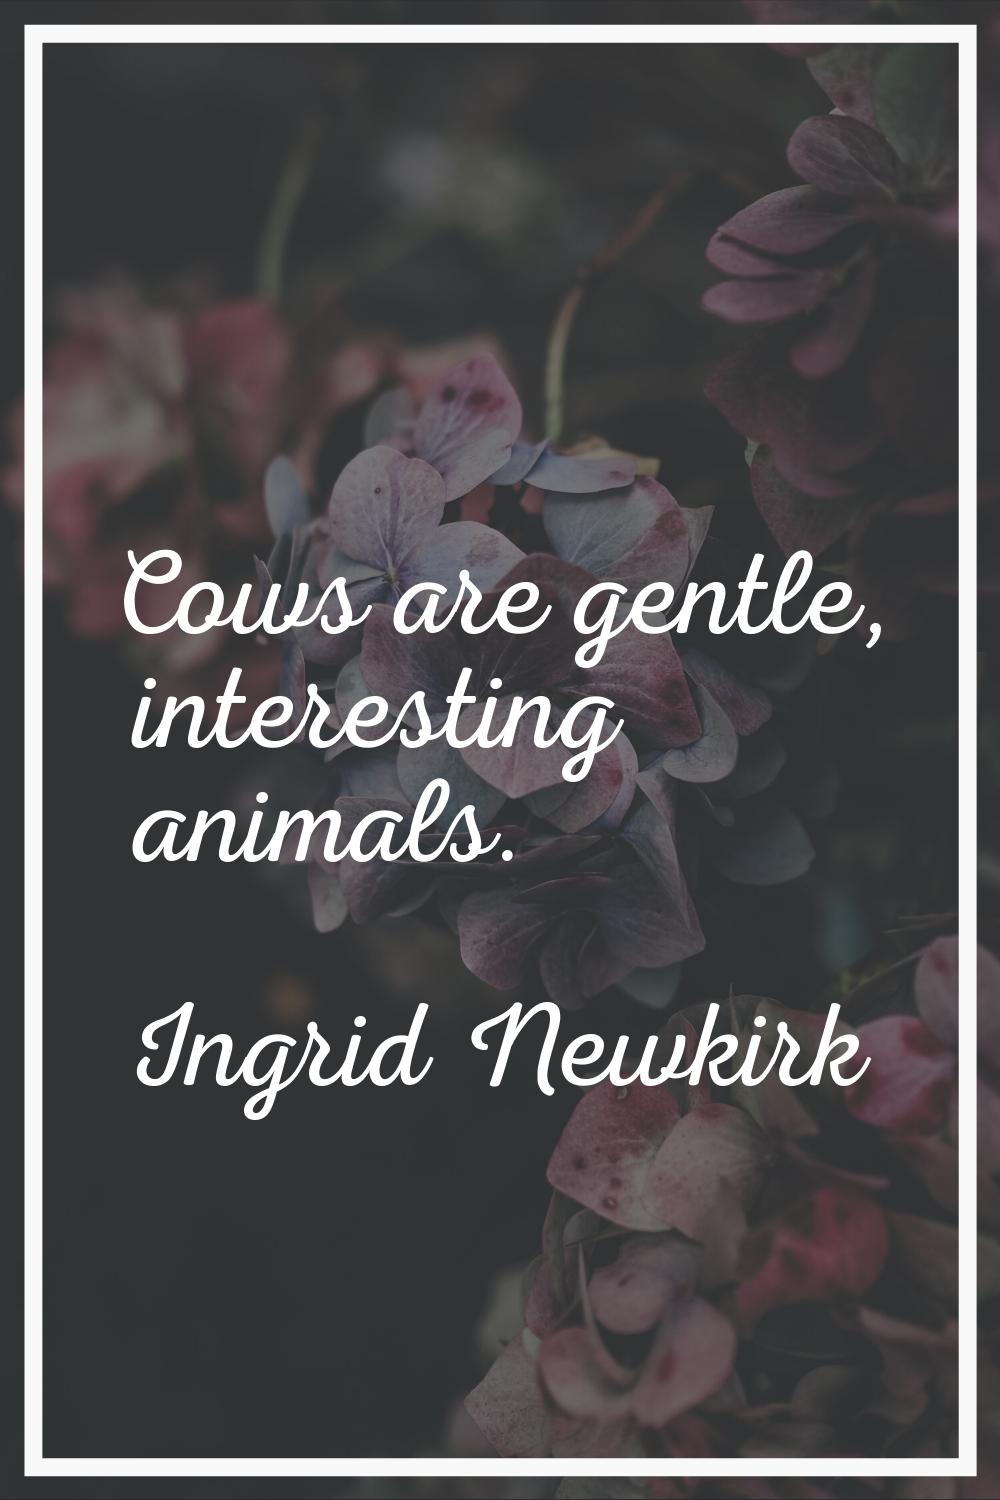 Cows are gentle, interesting animals.